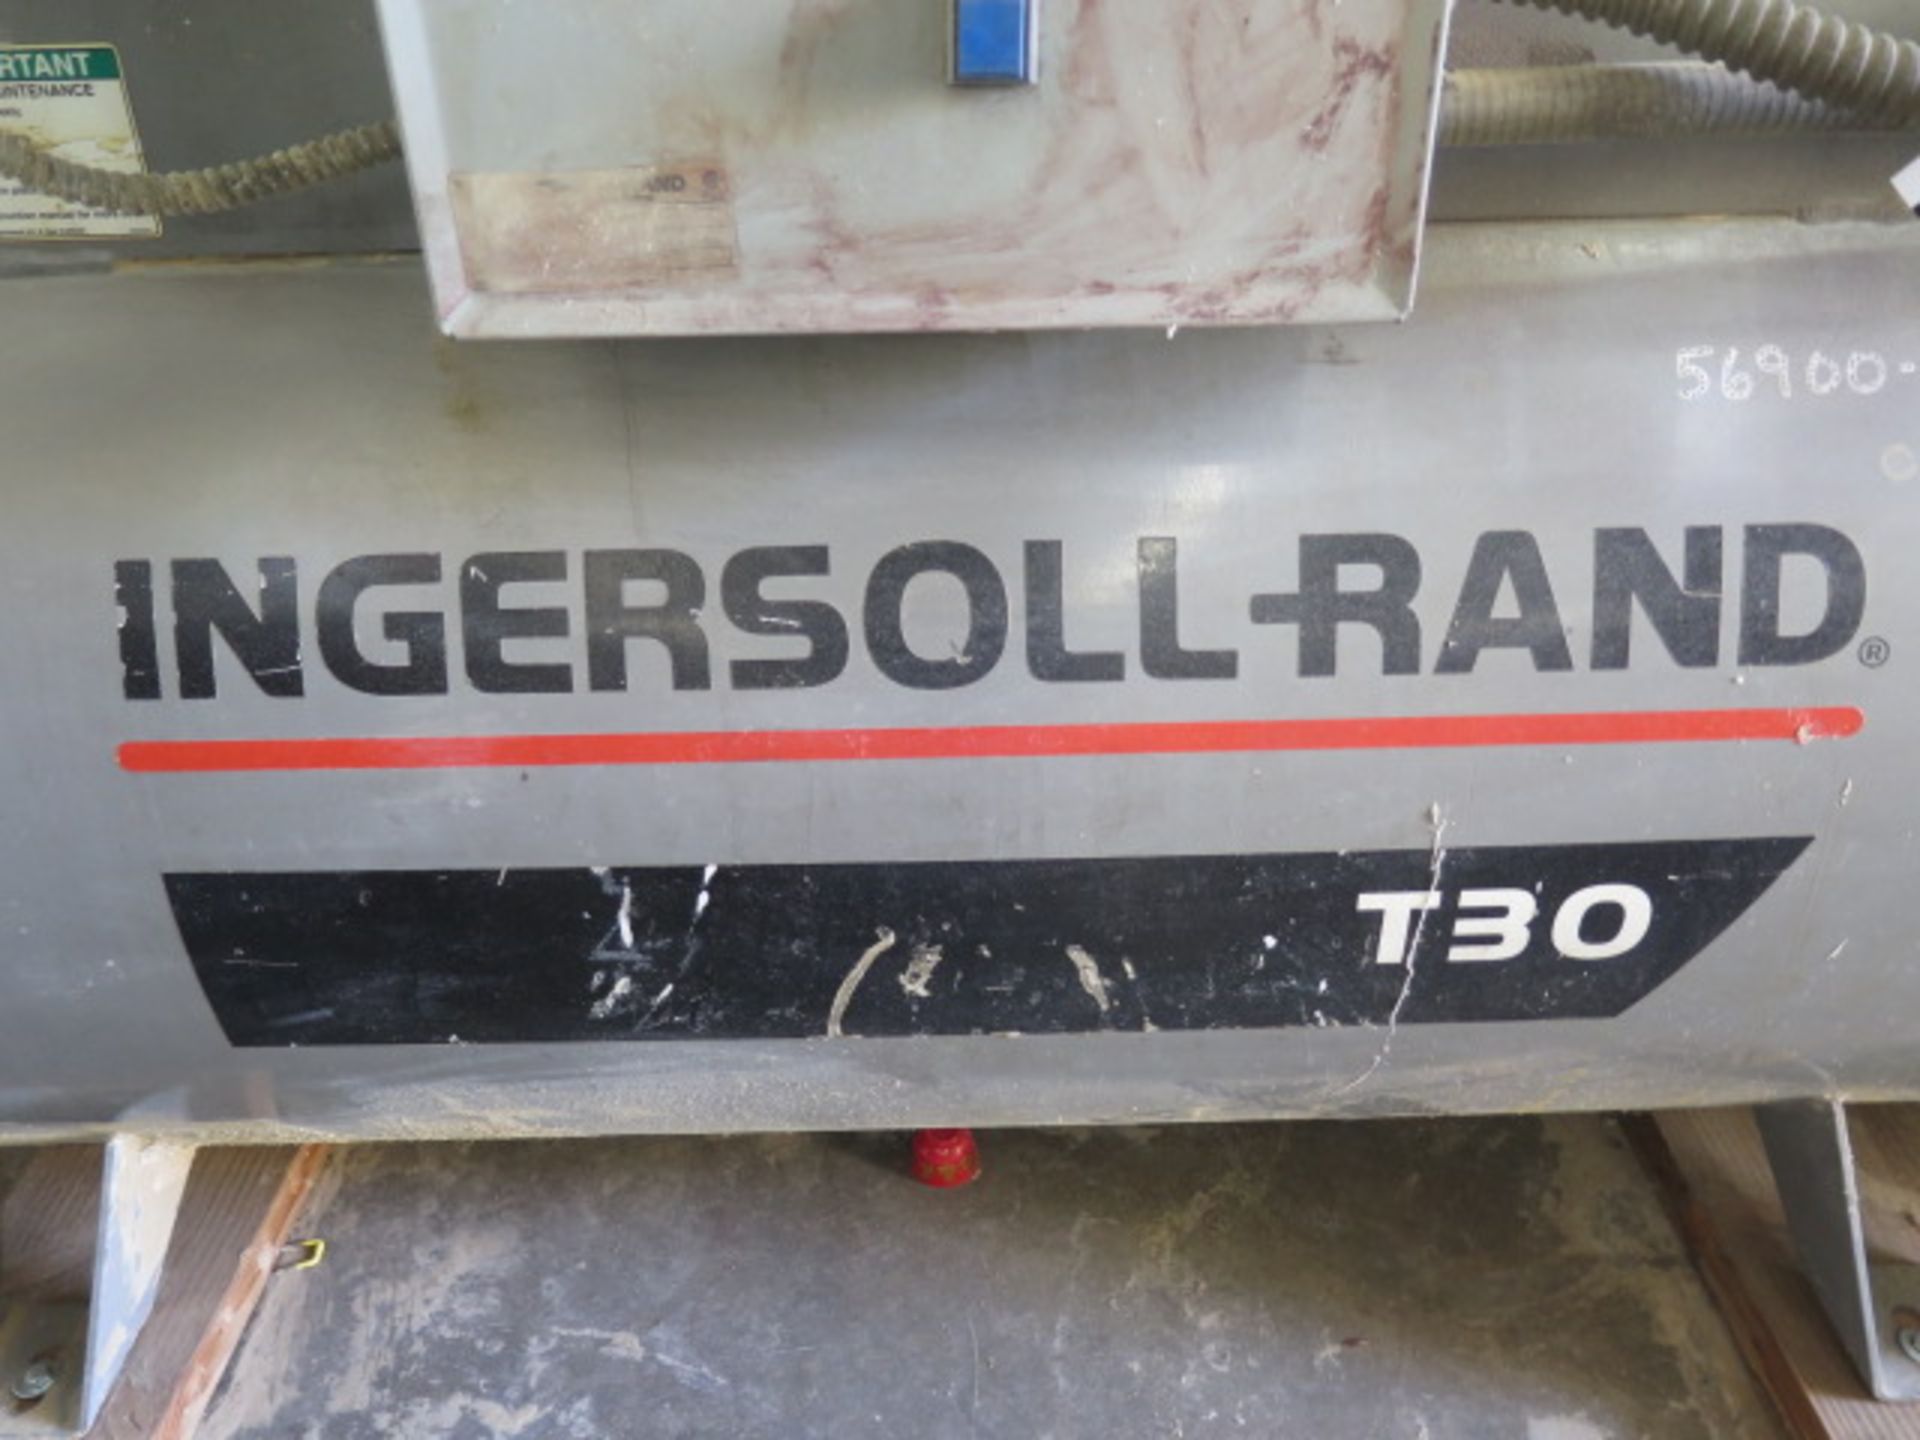 Ingersoll Rand T30 10/7.5Hp Horizontal Air Compressor w/ 2-Stage Pump, 80 Gallon SOLD AS IS - Image 6 of 7